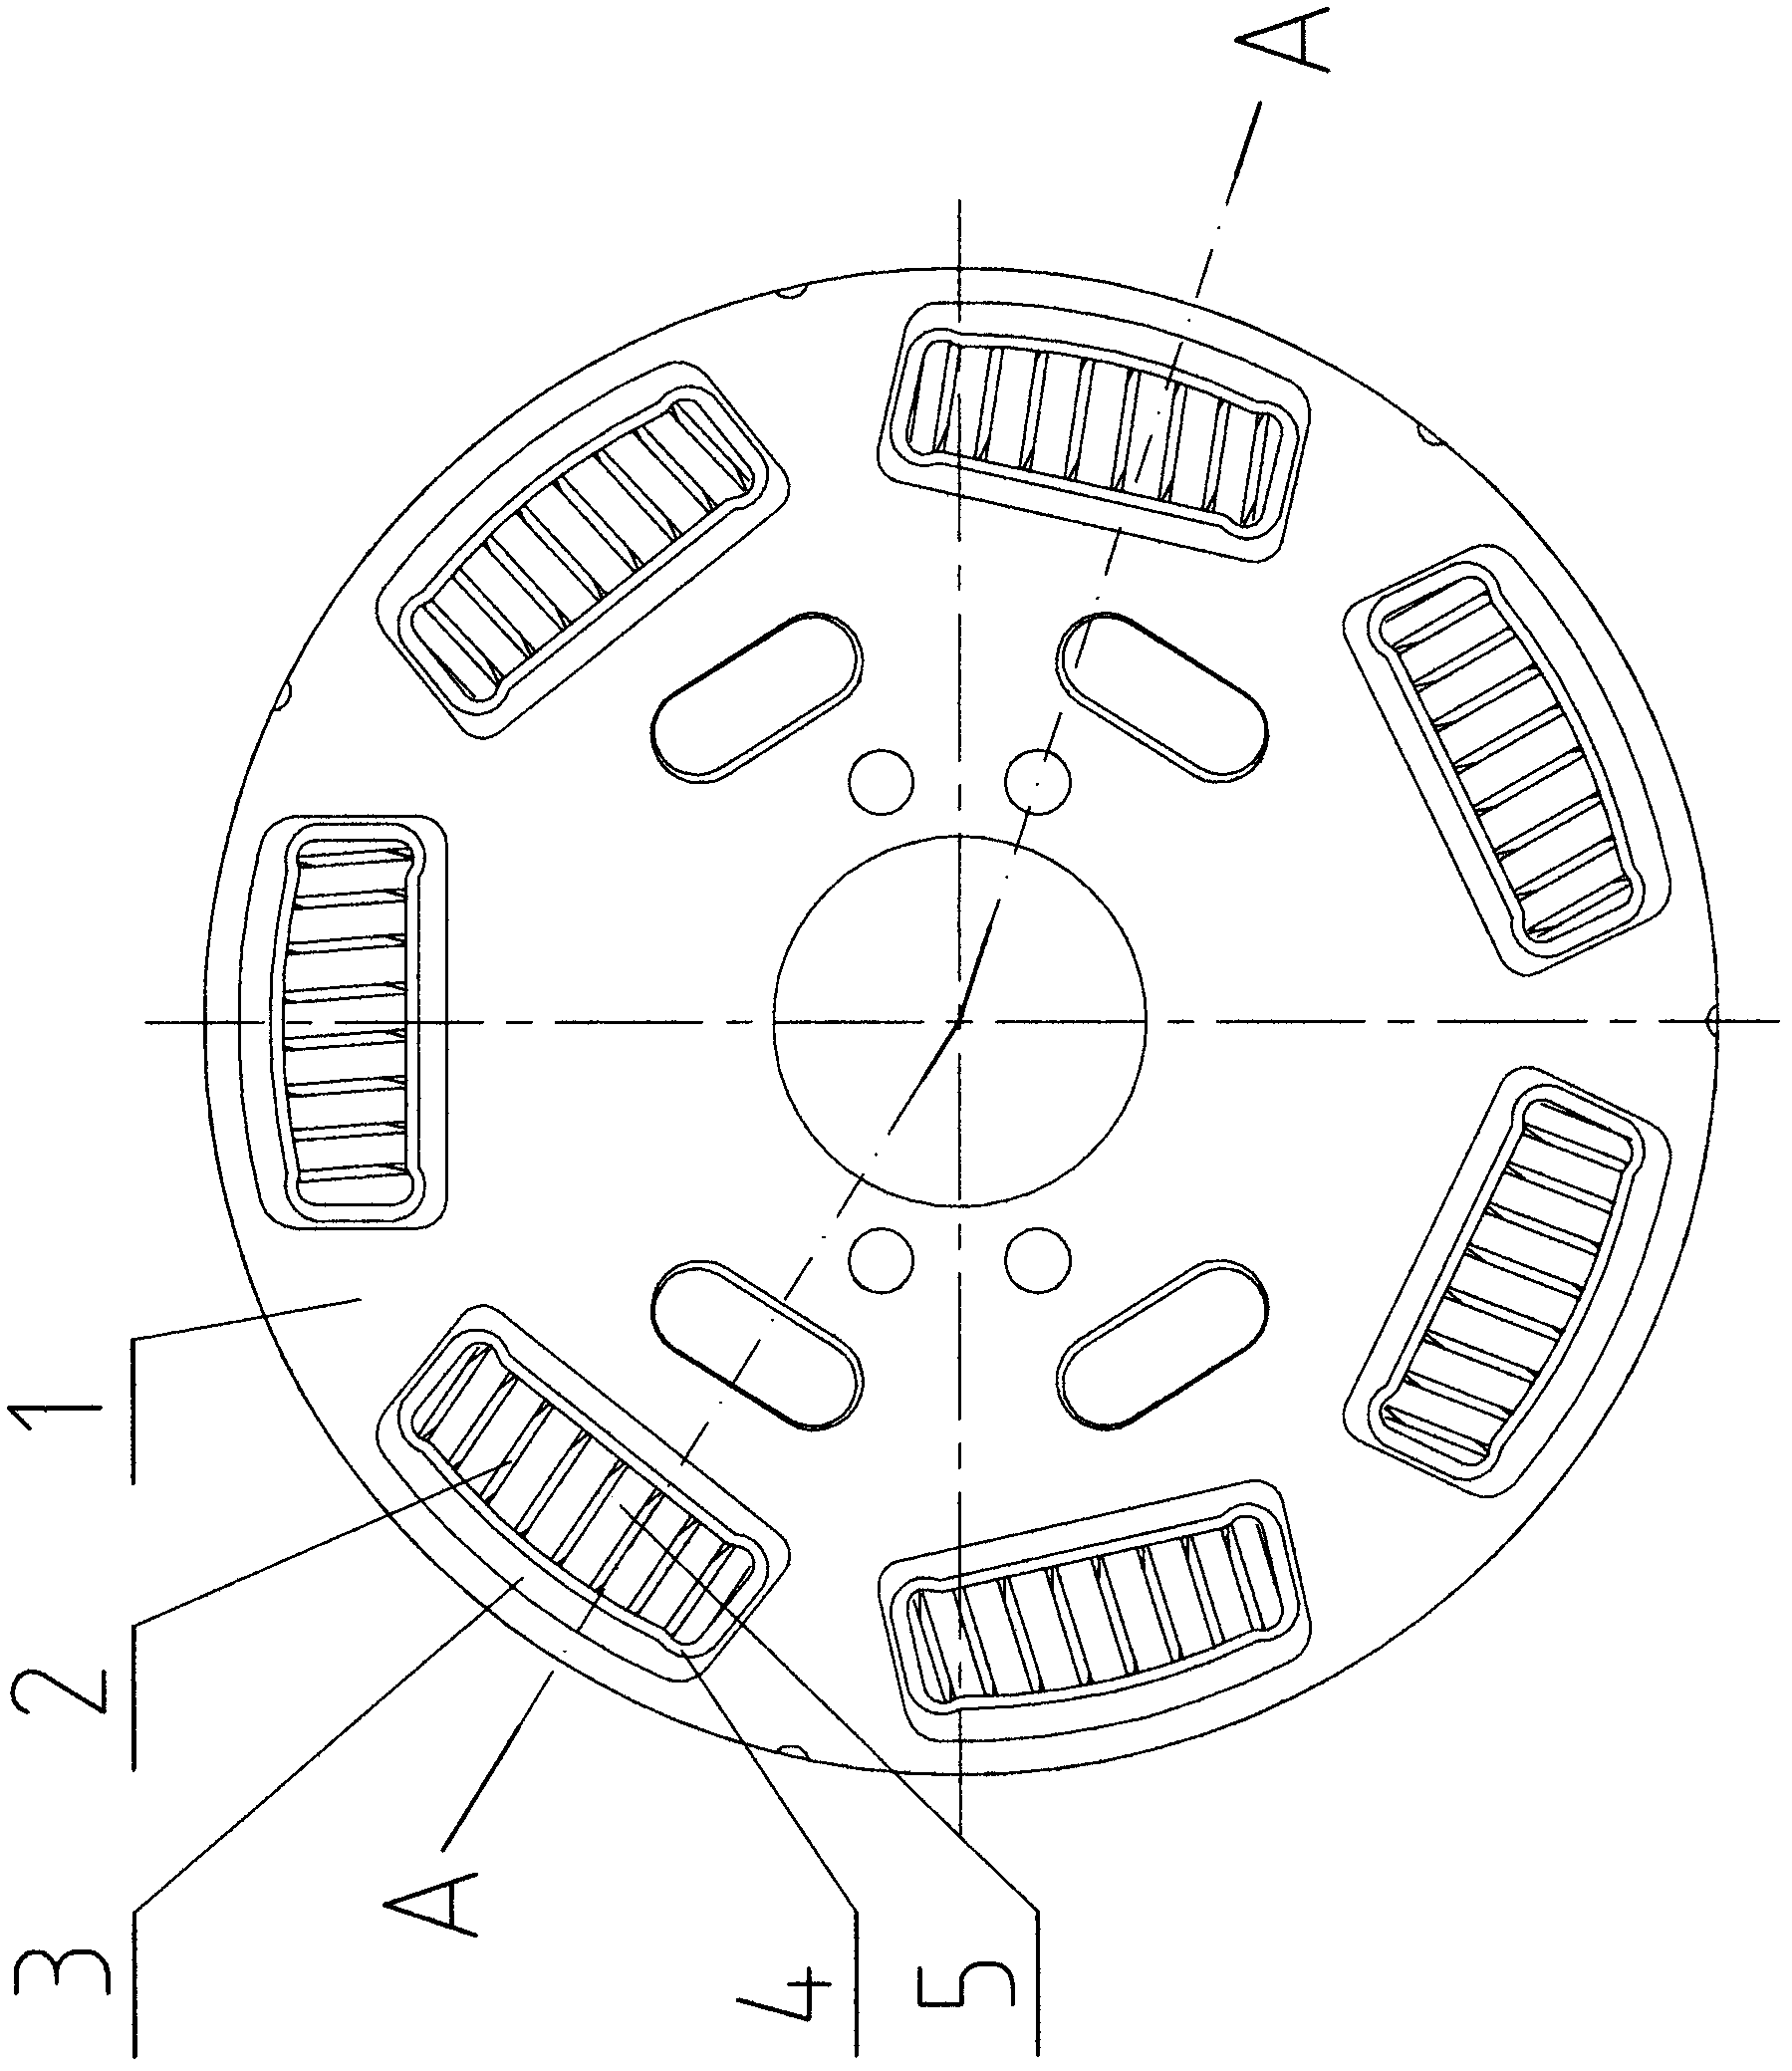 Structure of damping disc for automobile clutch driven disc assembly